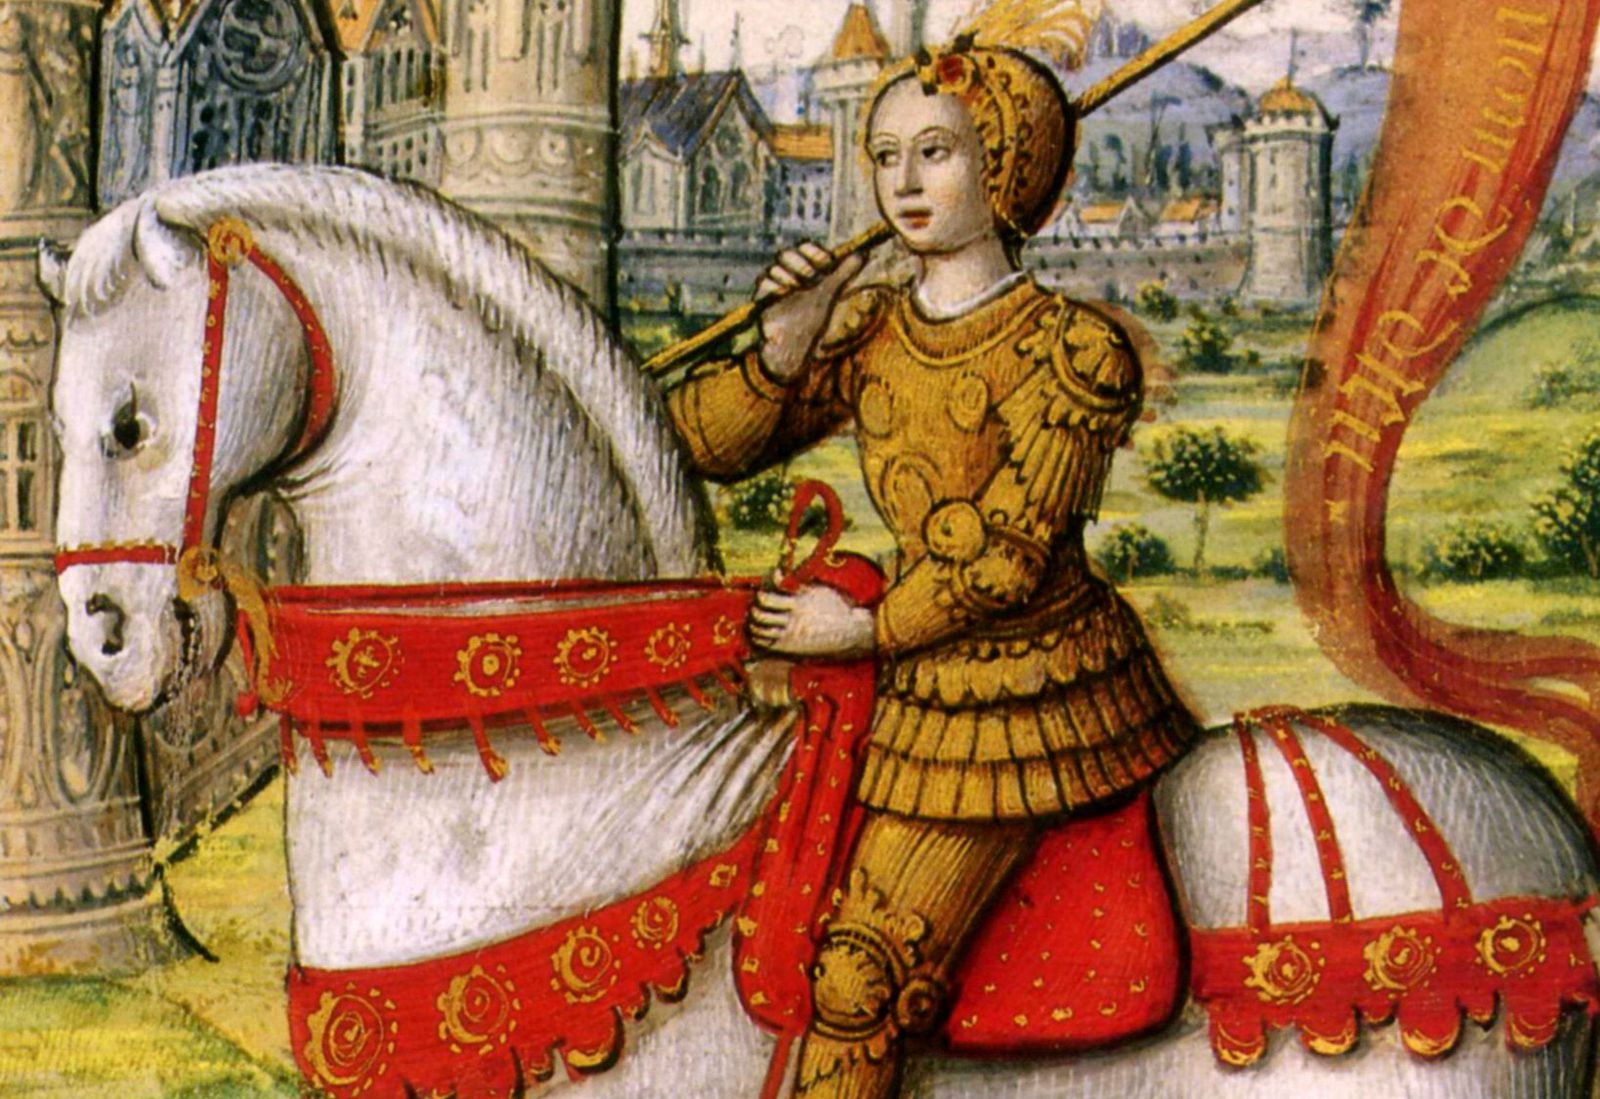 Joan of Arc's personal experiences are perfectly captured in David Elliott's "Voices: The Final Hours of Joan of Arc." (Image via Smithsonian Magazine)